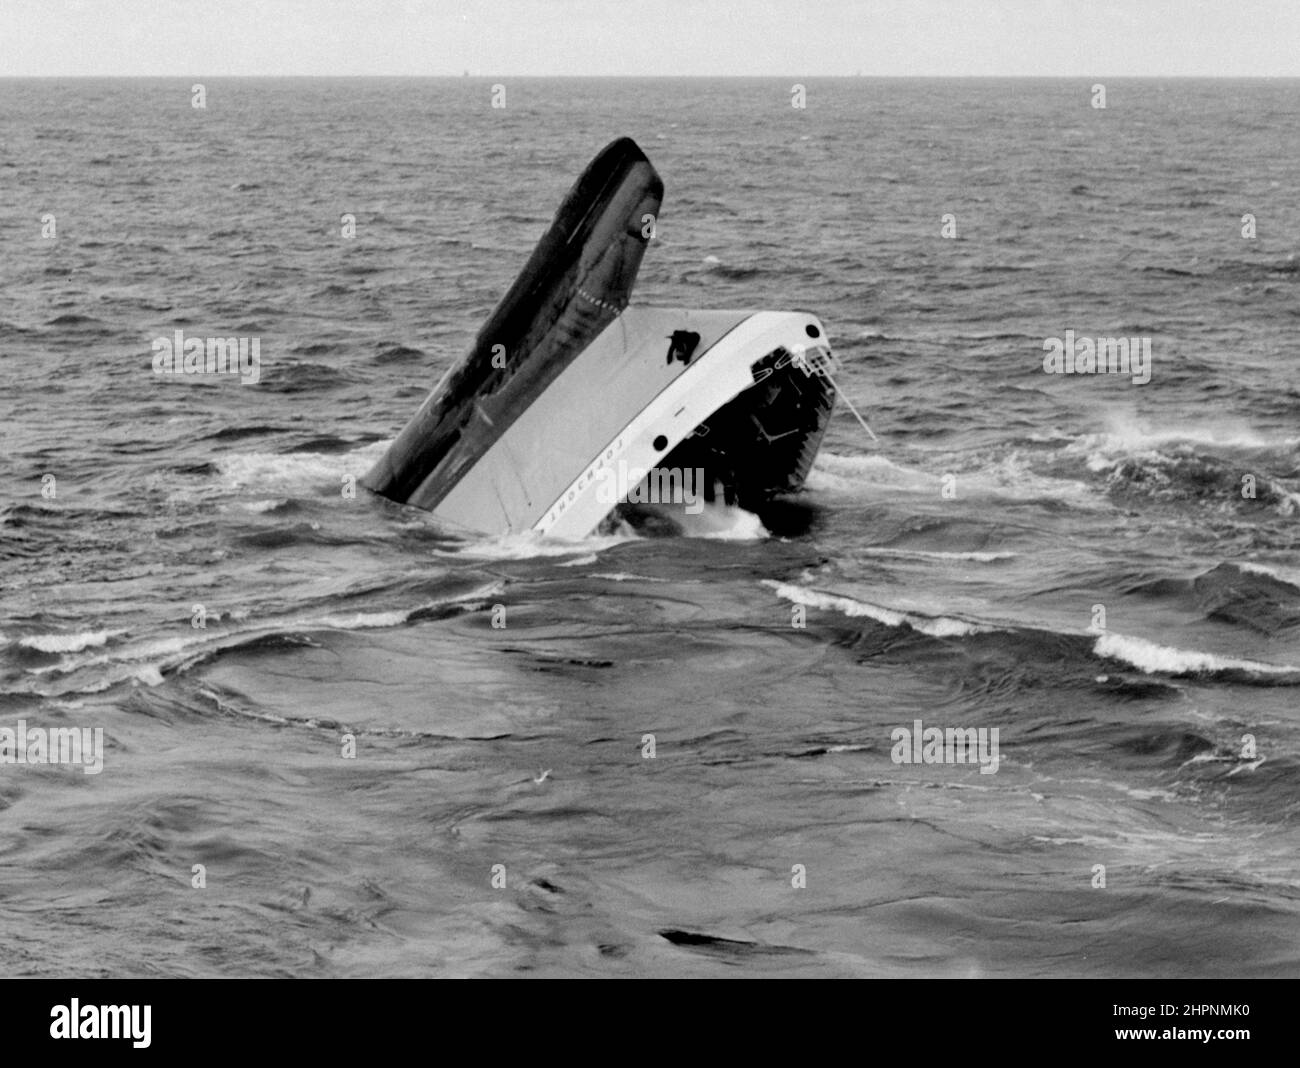 AJAXNETPHOTO. NOVEMBER, 1975. ENGLISH CHANNEL. - GORIZONT COLLISION - THE BOWS OF THE RUSSIAN FISHING SUPPLY SHIP GORIZONT PROTRUDING FROM 38 FATHOMS OF WATER WHERE SHE SANK IN THE CHANNEL 22 MILES SOUTH OF THE ISLE OF WIGHT ON THE NIGHT OF 25TH NOVEMBER '75. THE GORIZONT SANK AFTER BEING IN COLLISION WITH THE IFNI, A MORROCAN CARGO VESSEL. HER CREW WERE TAKEN OFF BY THE RUSSIAN TRAWLER SHE WAS SUPPLYING AND THERE WERE BELIEVED TO BE NO CASUALTIES.PHOTO: AJAX NEWS PHOTOS REF:752811 9 Stock Photo